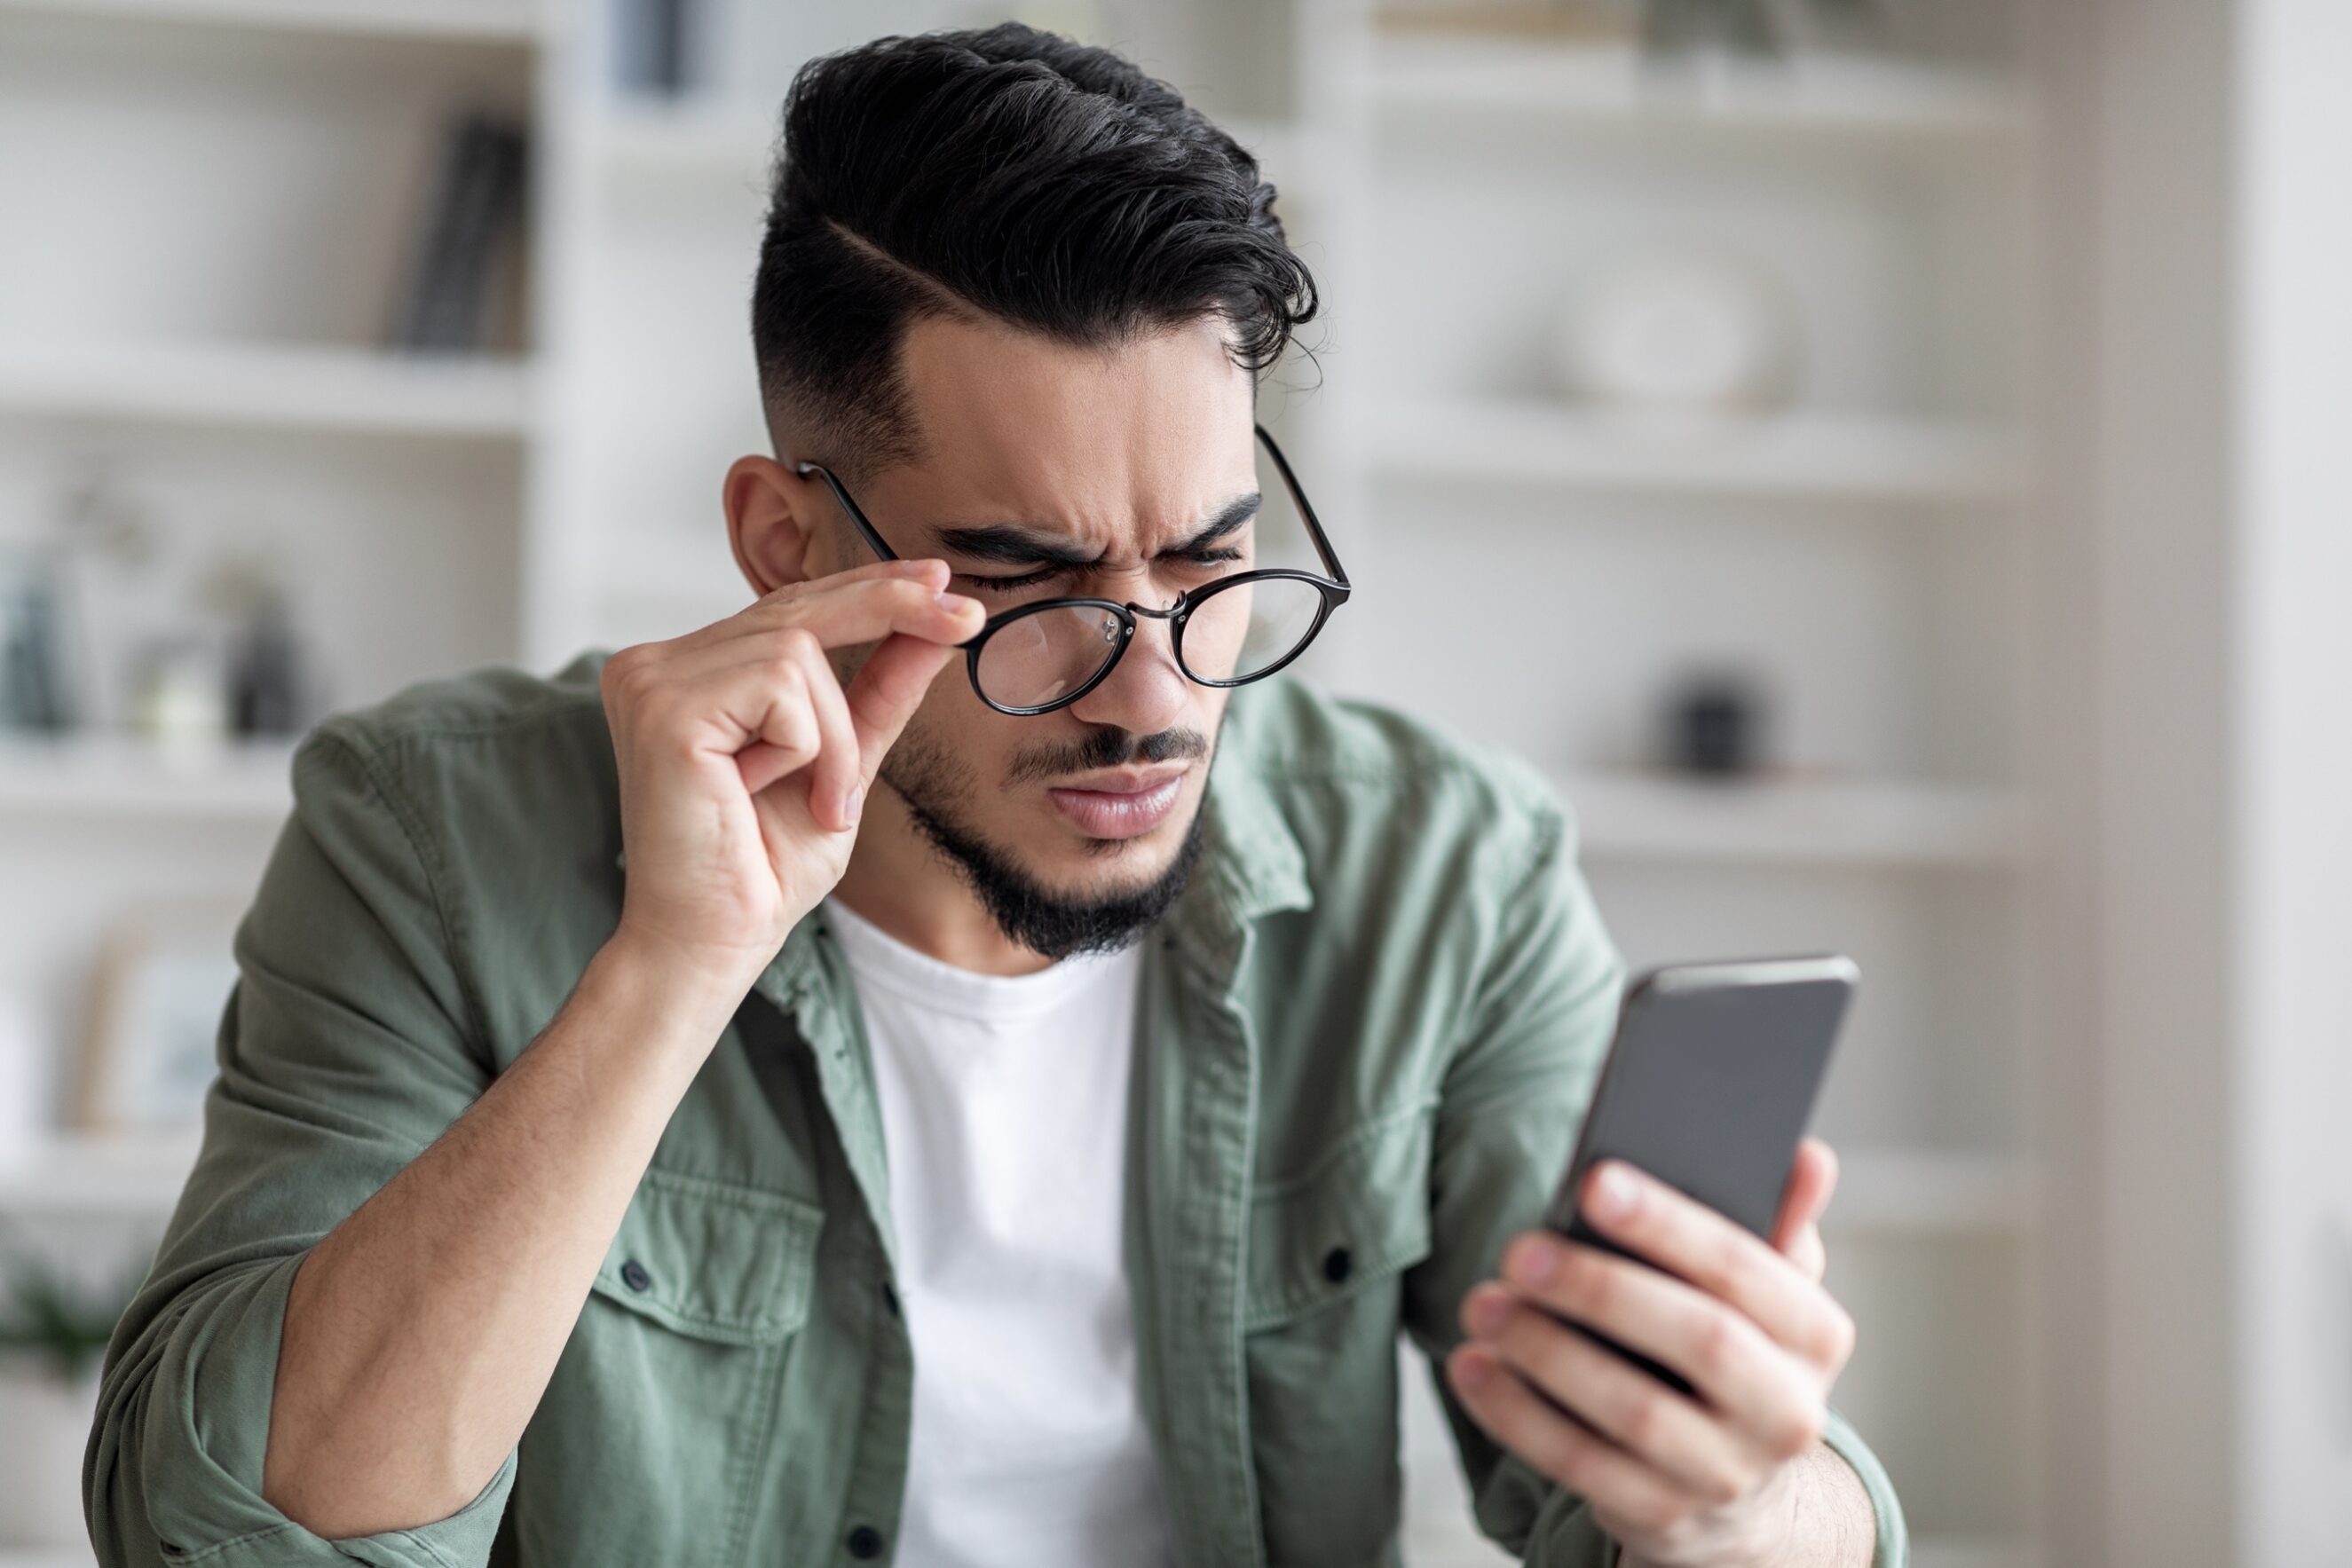 Man In Eyeglasses Looking At Smartphone Screen And Frownin